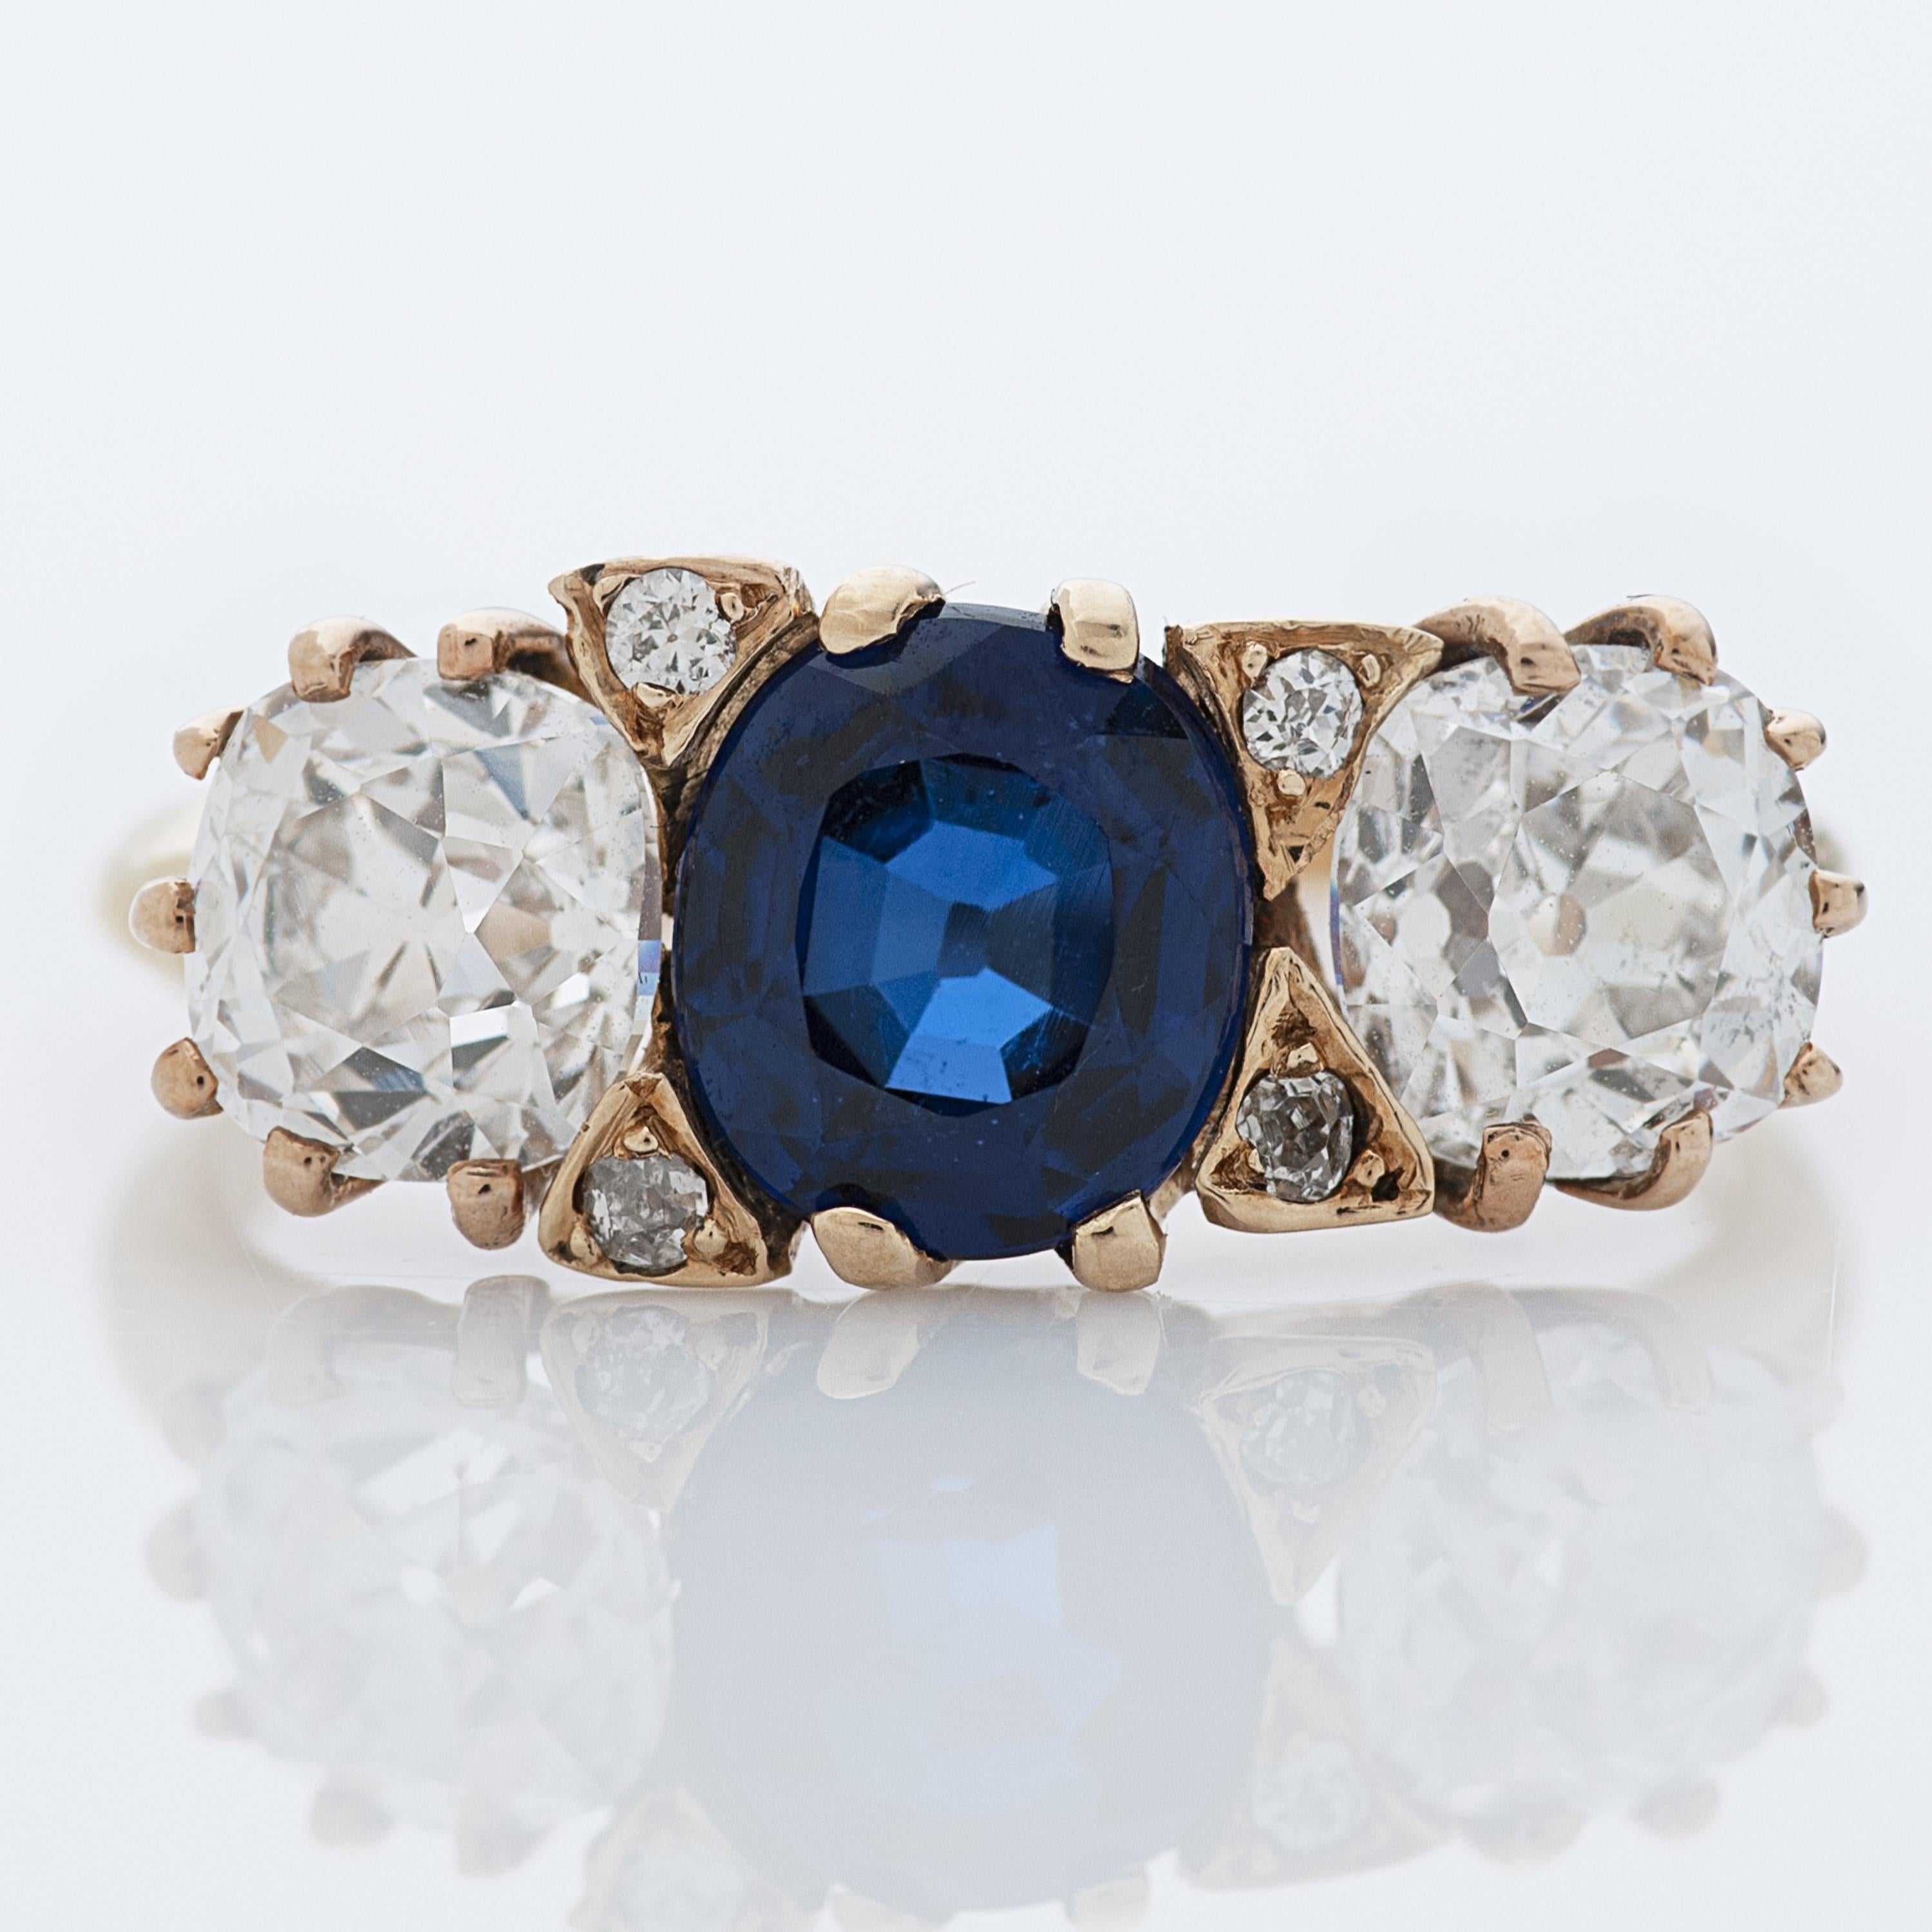 Antique J.E. Caldwell & Co. sapphire and diamond 3 stone ring in 14k yellow gold.

The centerpiece of this ring is a 1.64 carat unheated cushion cut Cambodian sapphire accompanied by an AGL report, with Old Mine Cut diamonds on each side.  One Old